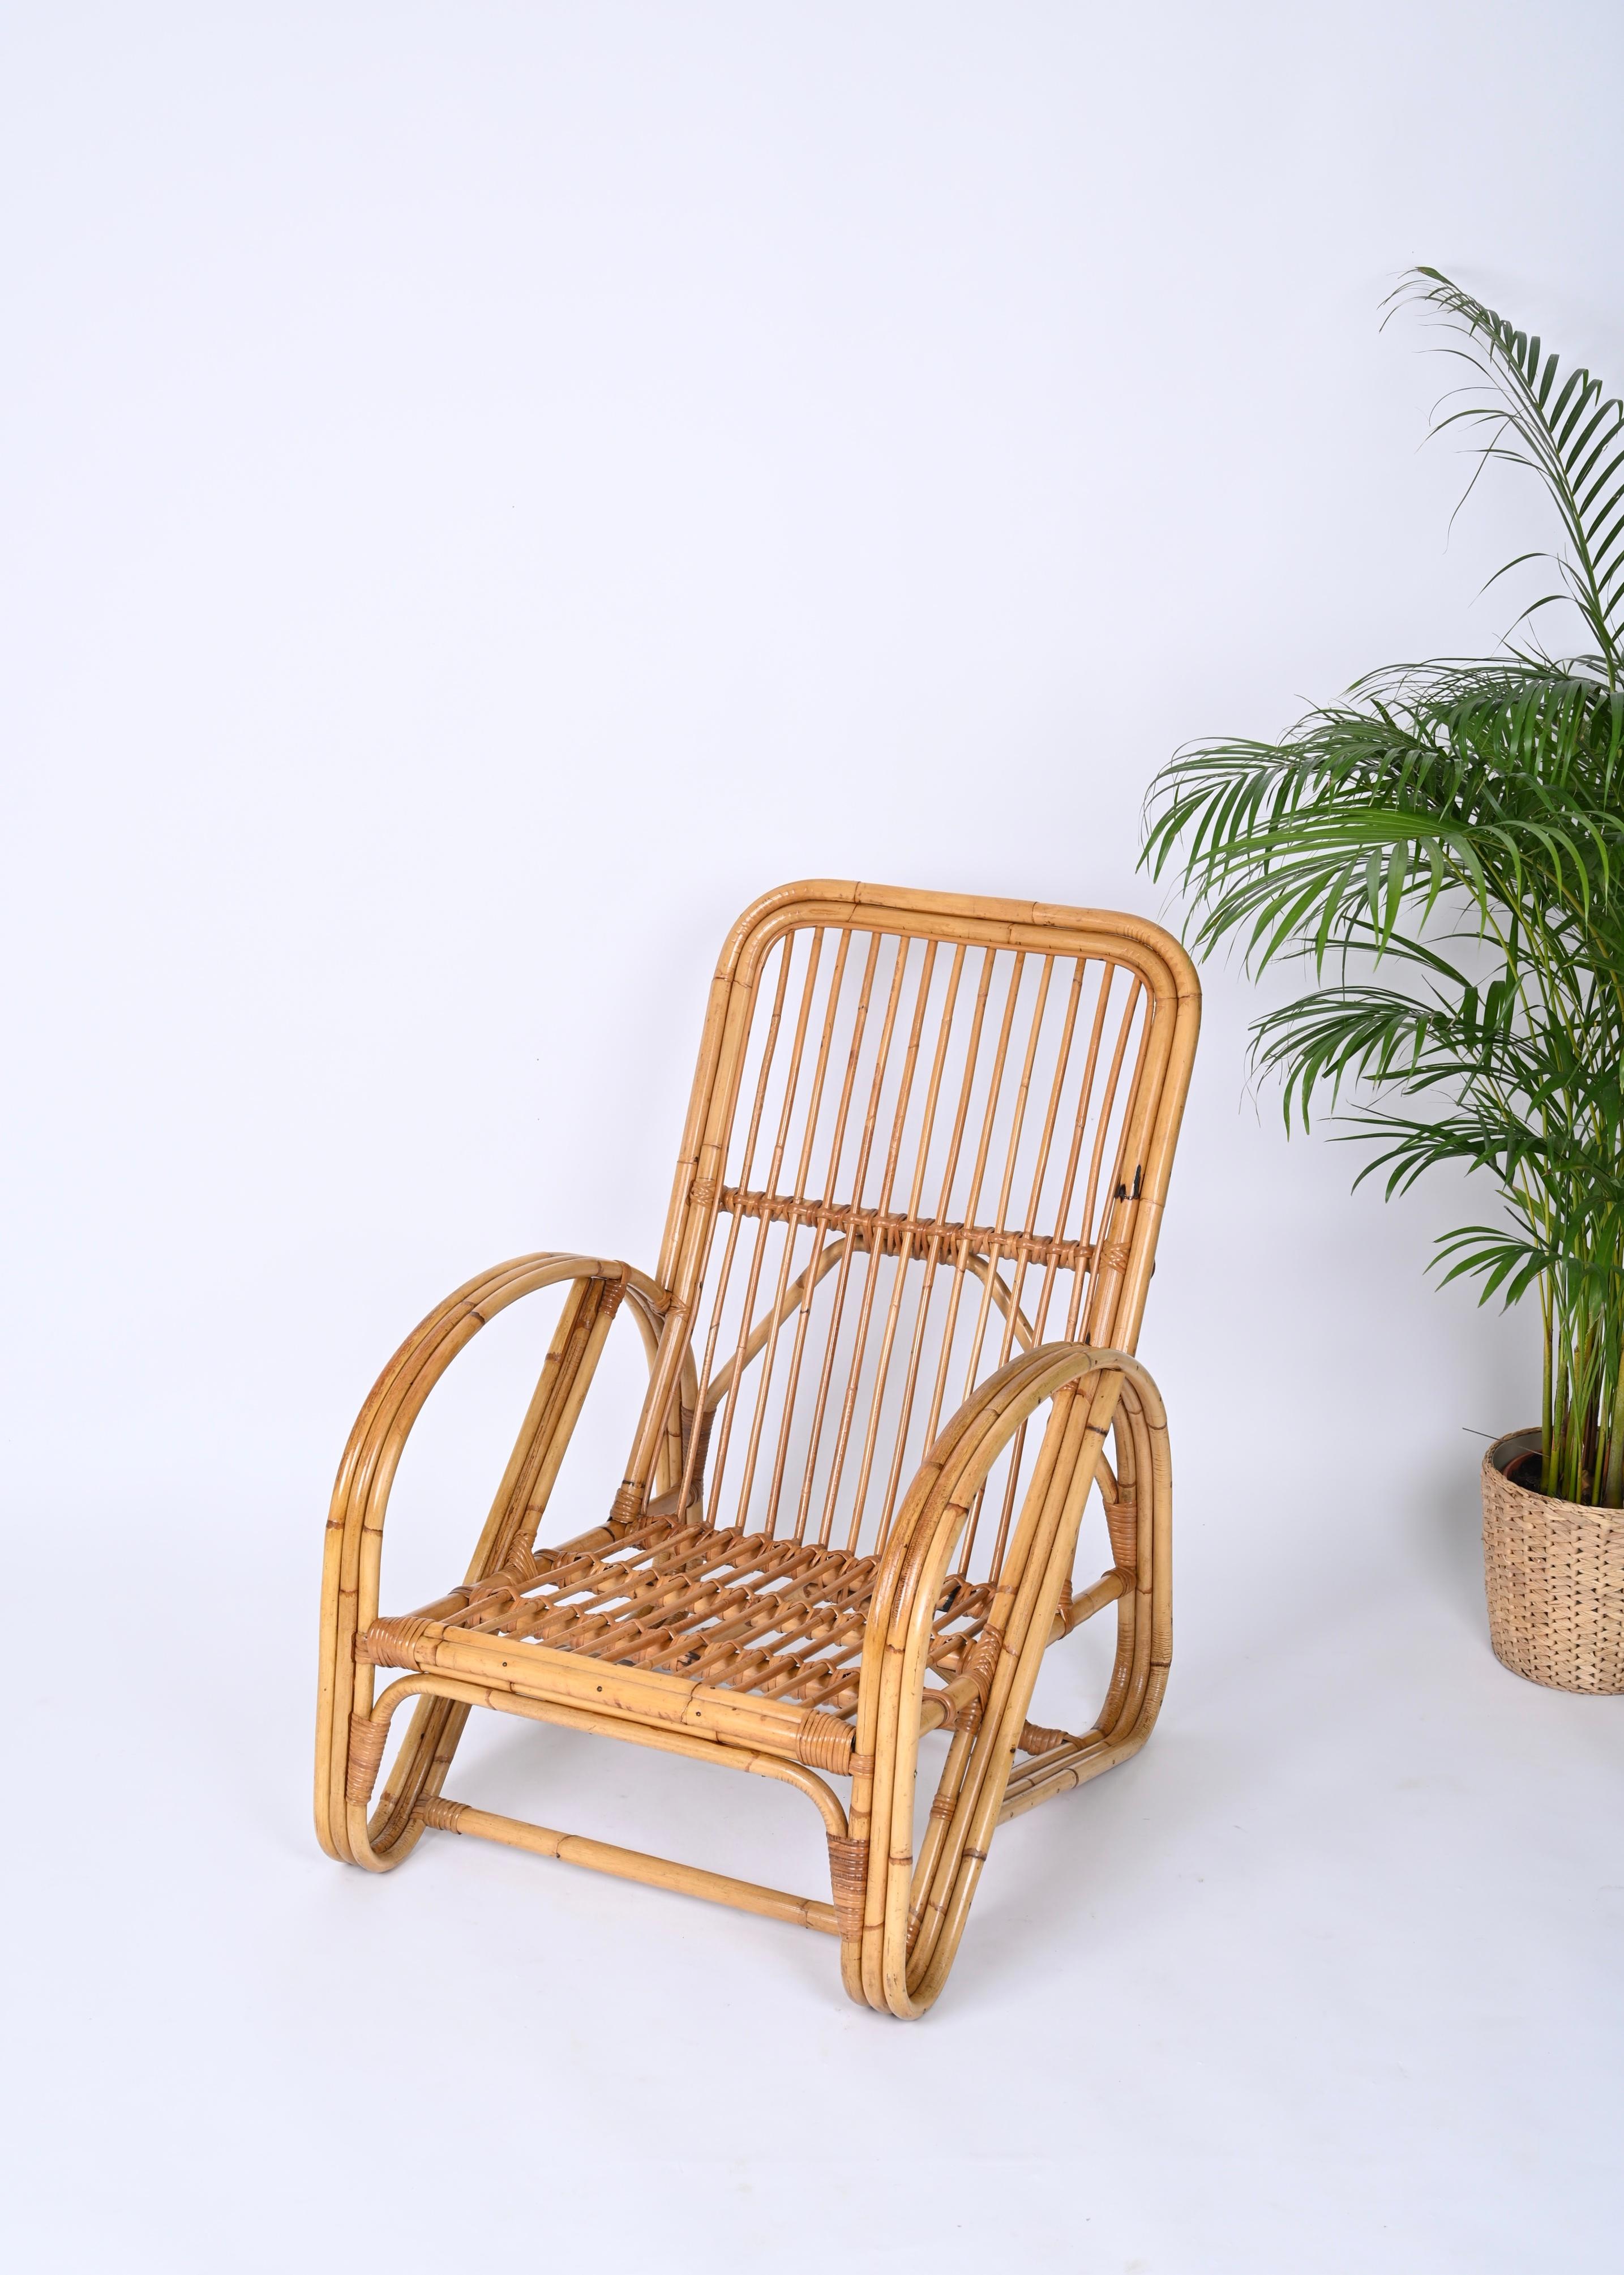 Fantastic Mid-Century armchair in bamboo and rattan. This stunnig armchair was produced by Vivai del Sud in Italy during the 1970s. 

The structure is fully made in curved bamboo with perfect proportions. The beauty of this armchair is due to the